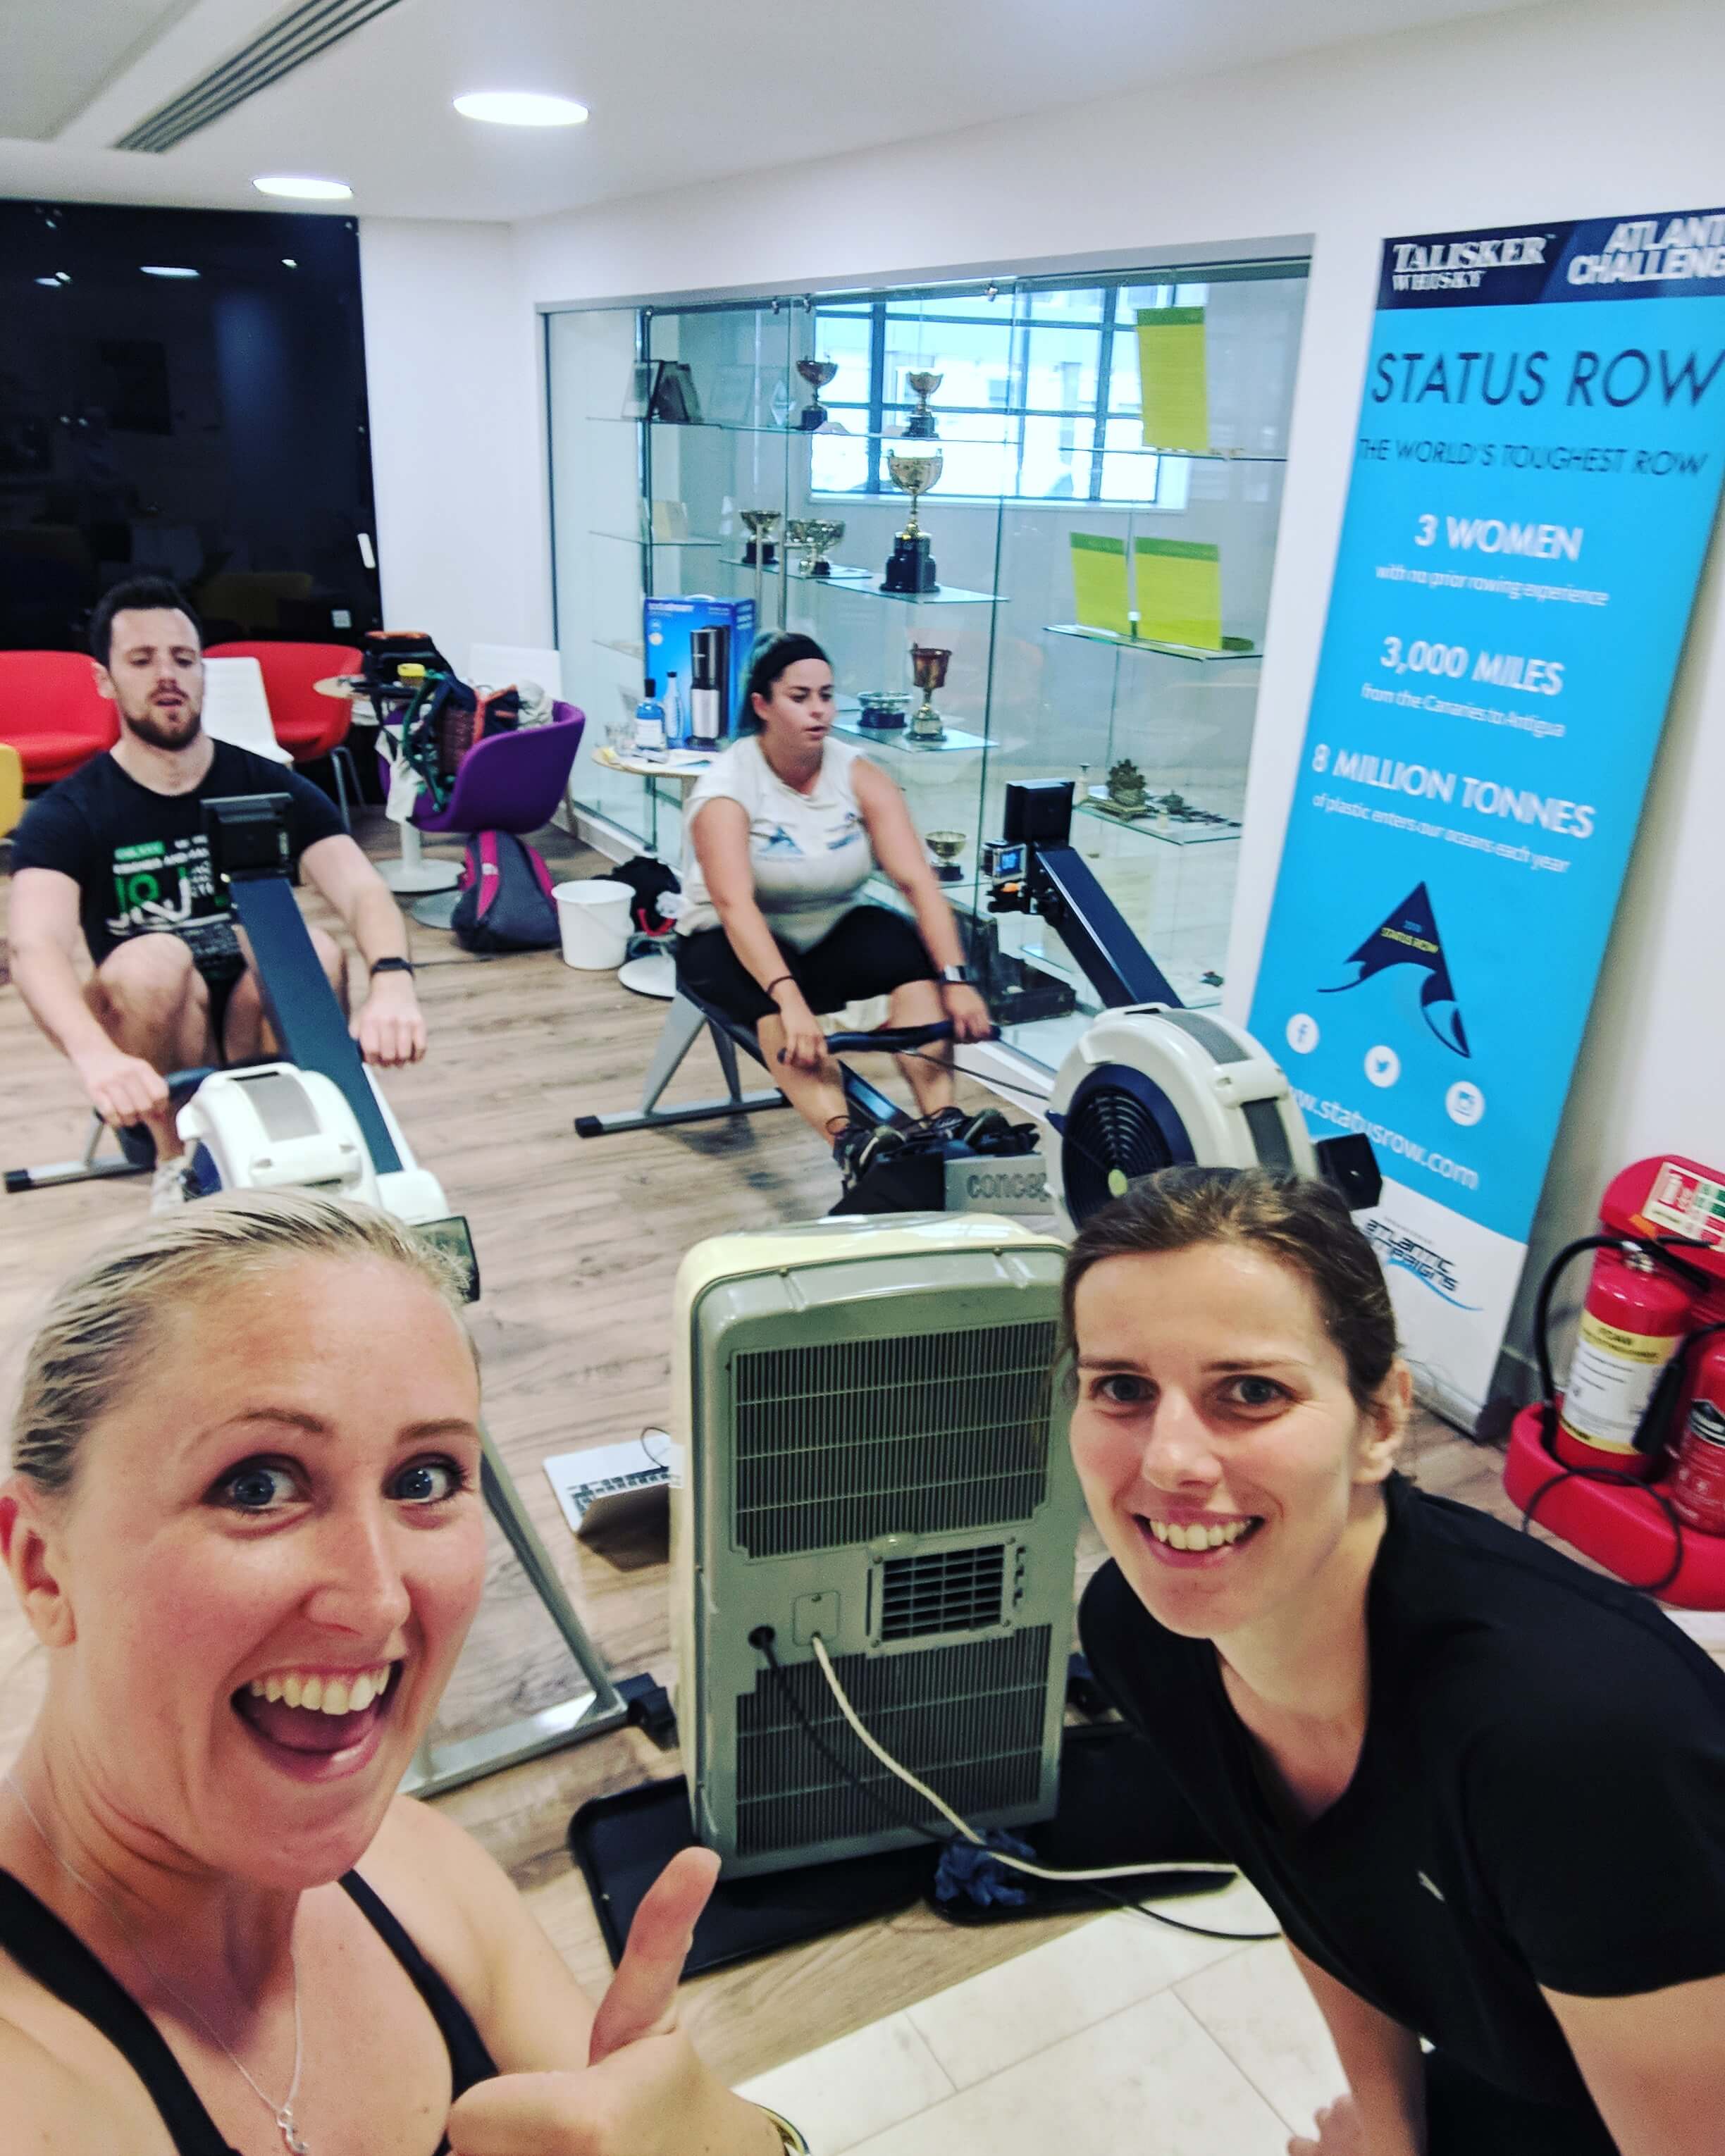 Status Row taking on 42 National Audit Office employees in an epic 10 hour rowing competition